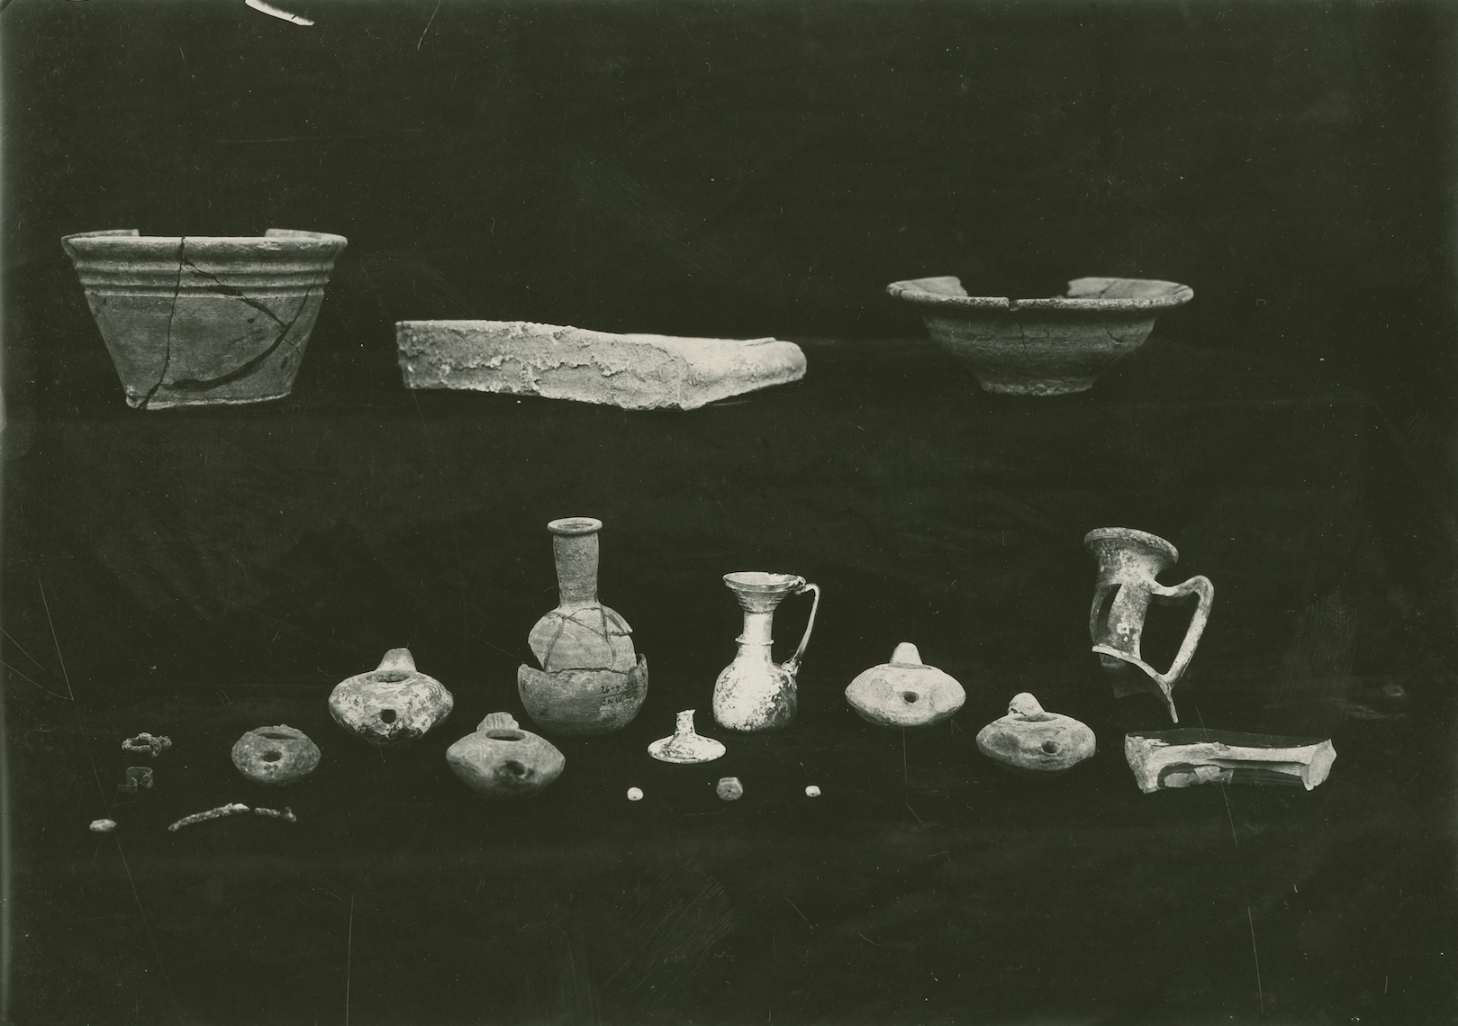 Photograph of the objects, including the jug located at the center, found in Tomb 207